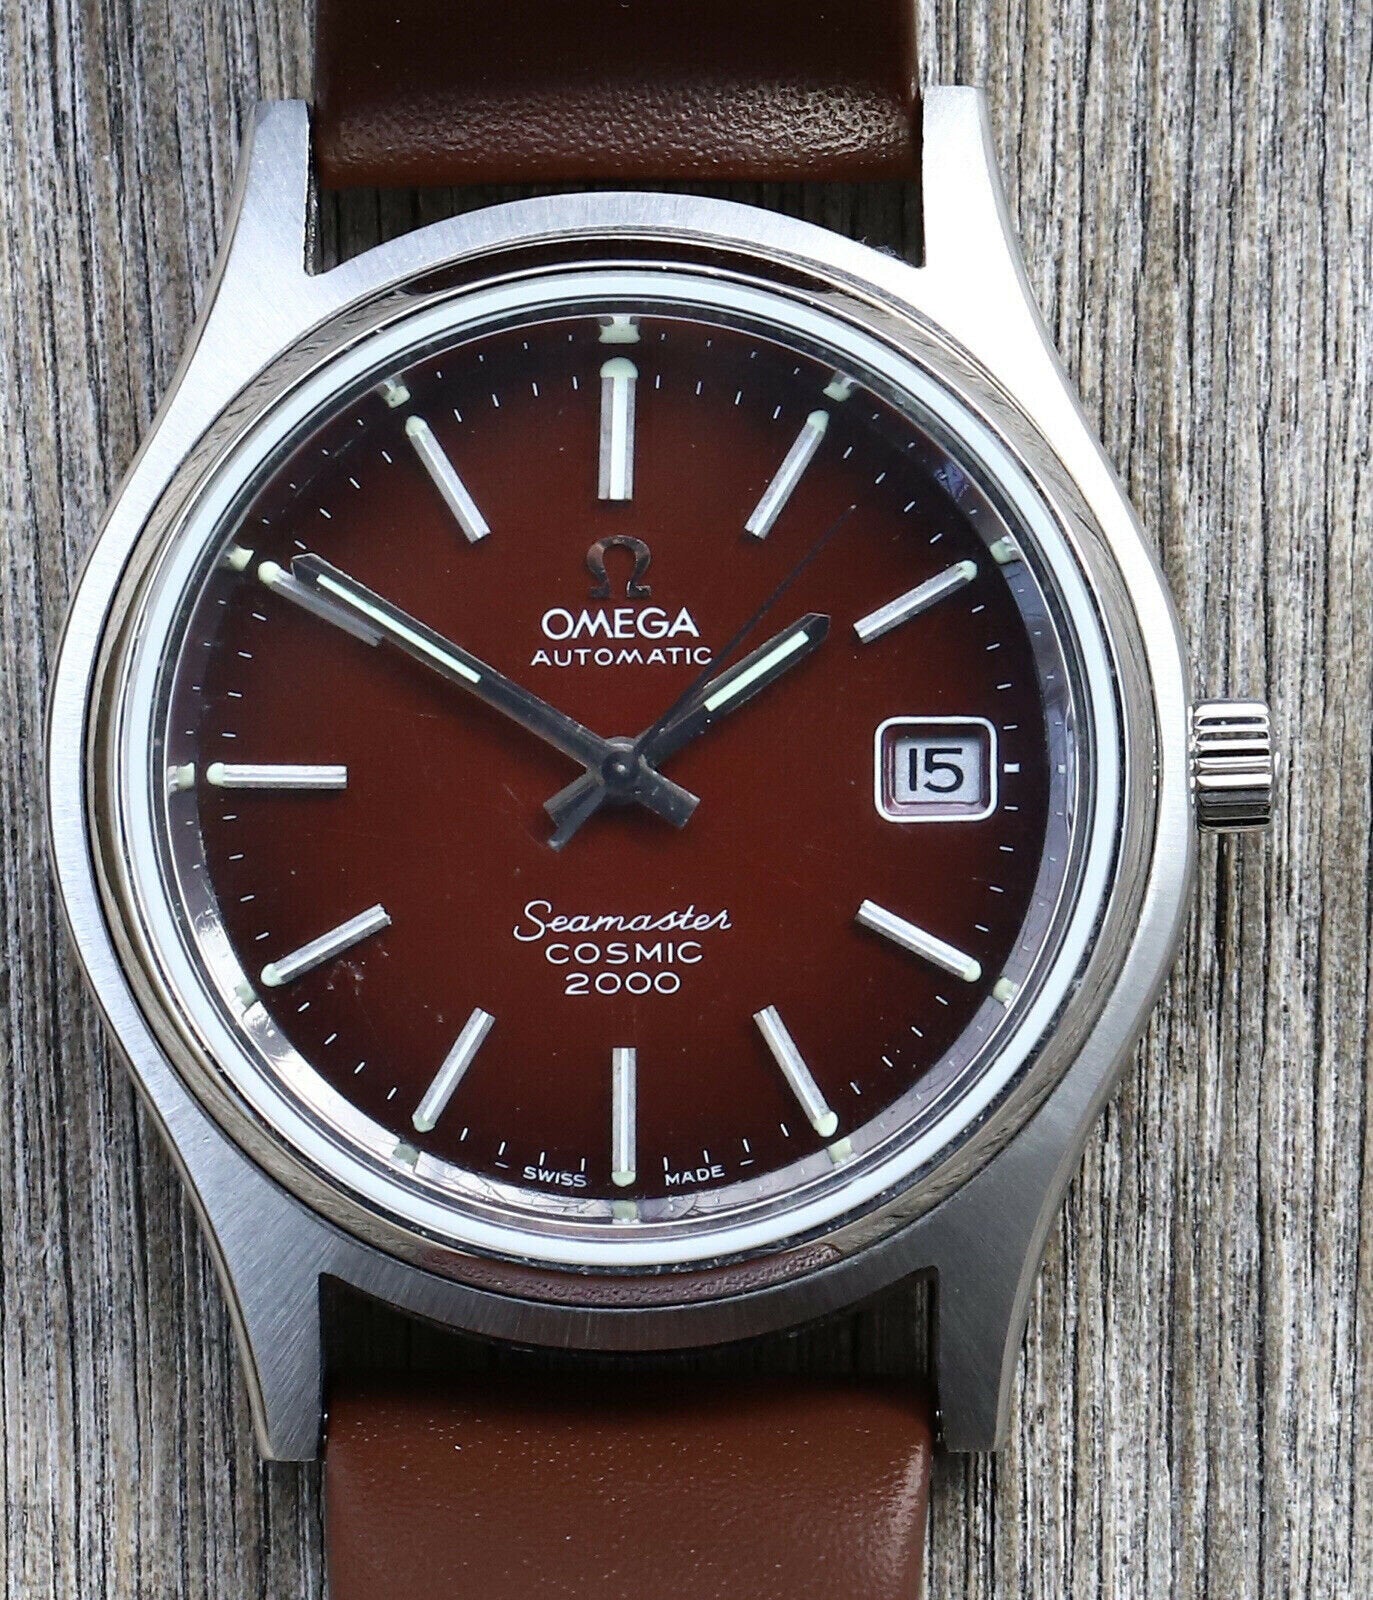 Omega_Seamaster_Cosmic_2000_Burgundy_Lacquer_Dial_-_1973_Watch_Vault_01.jpg